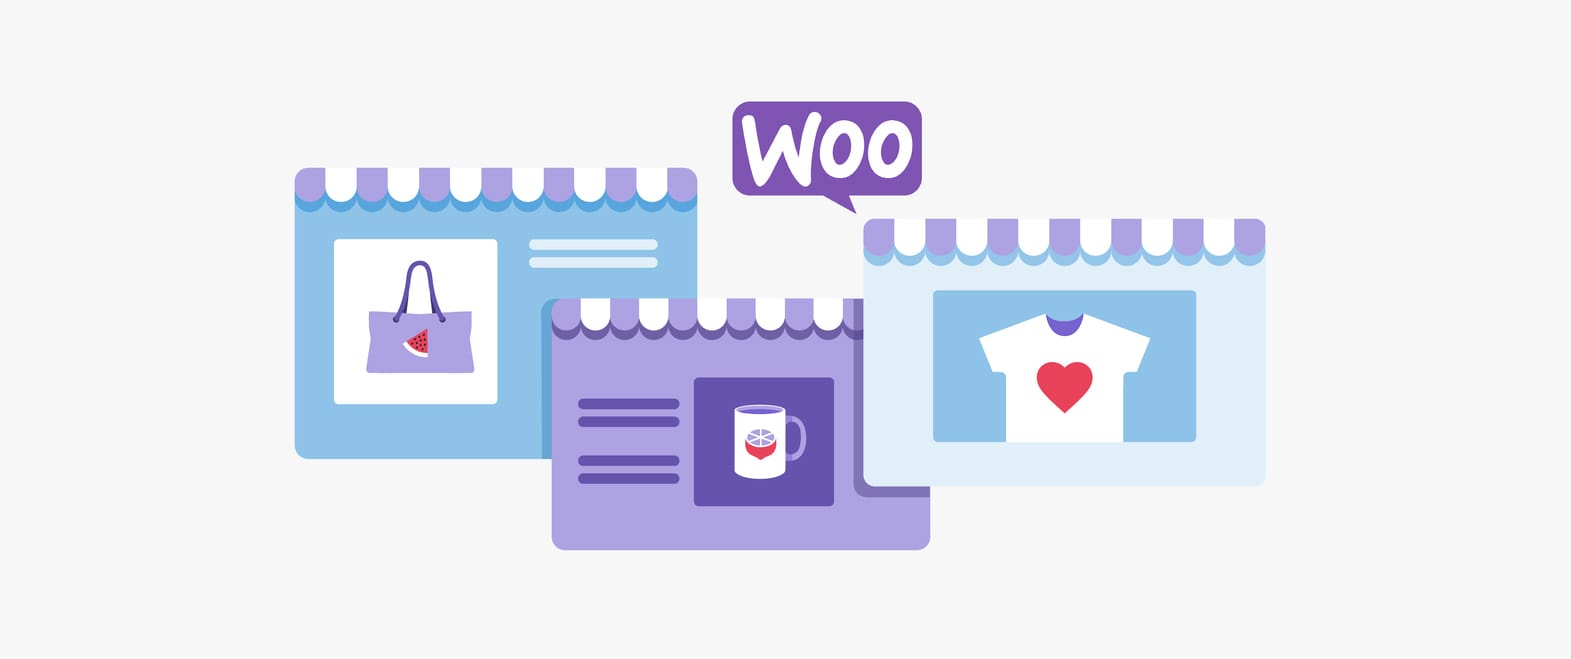 WooCommerce, the largest and most powerful website eCommerce platform